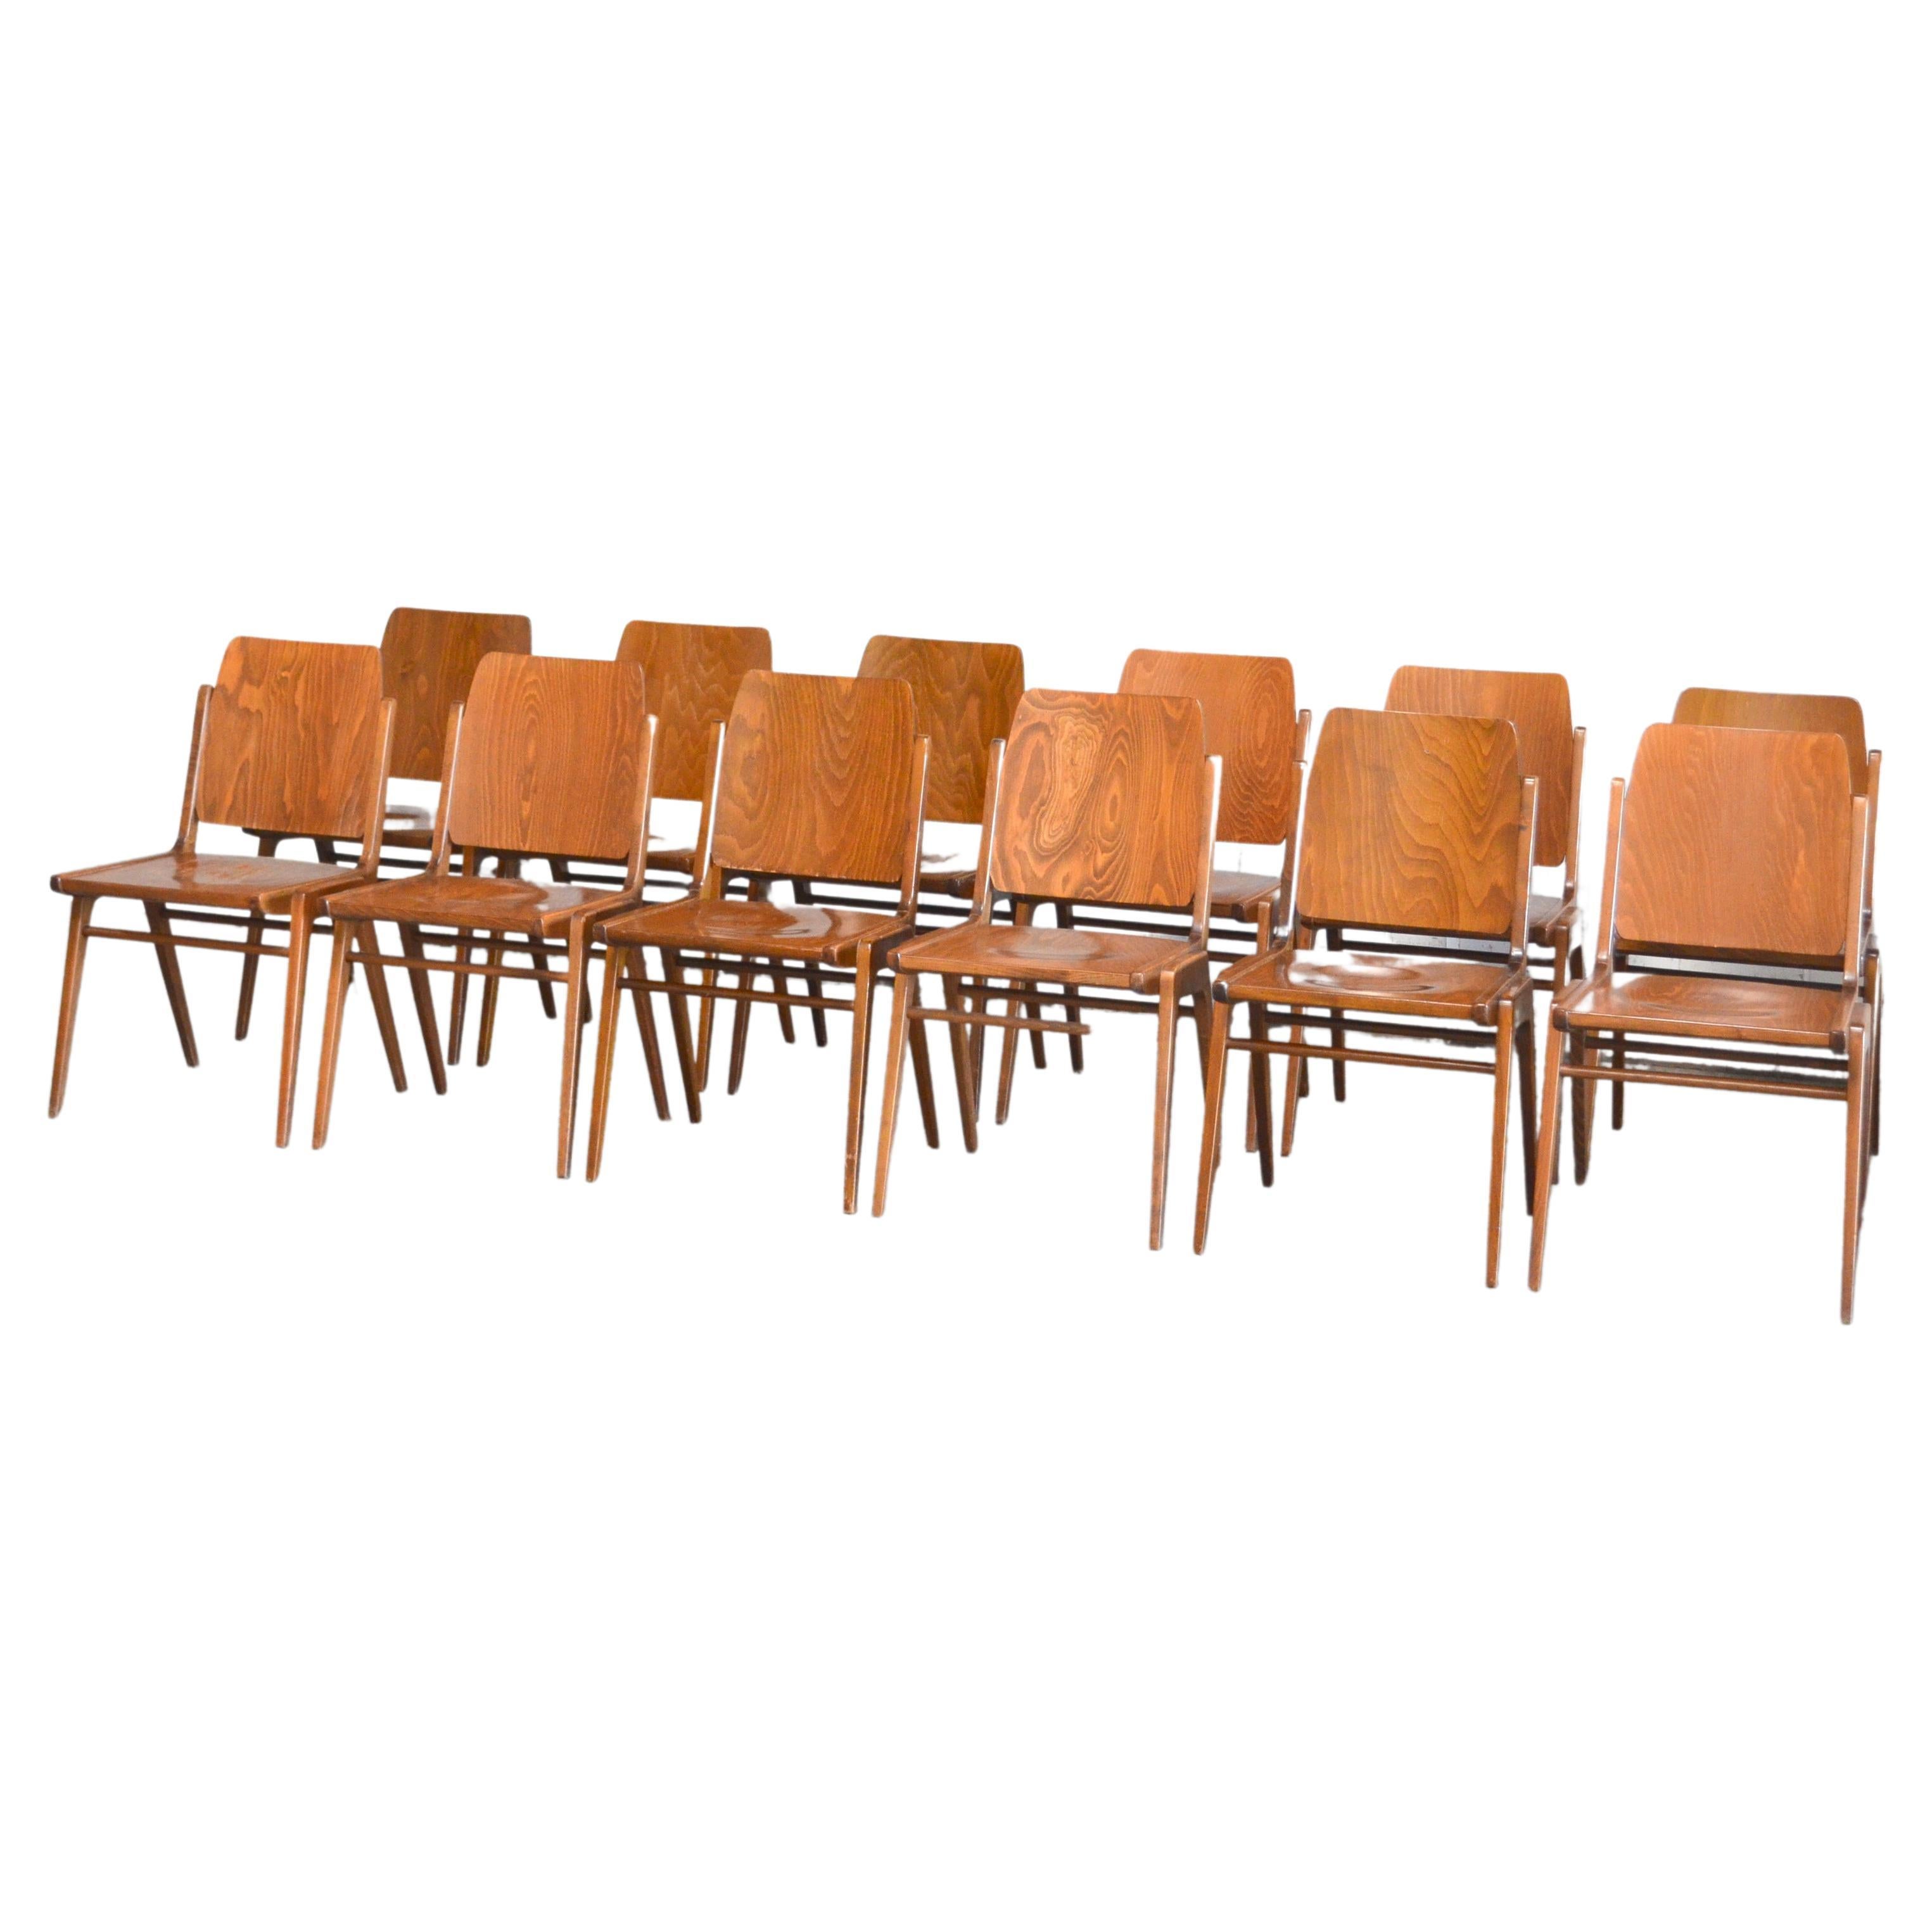 12Set of Original Austro Chairs by Franz Schuster for Wiesner Hager, Austria, 1959 For Sale